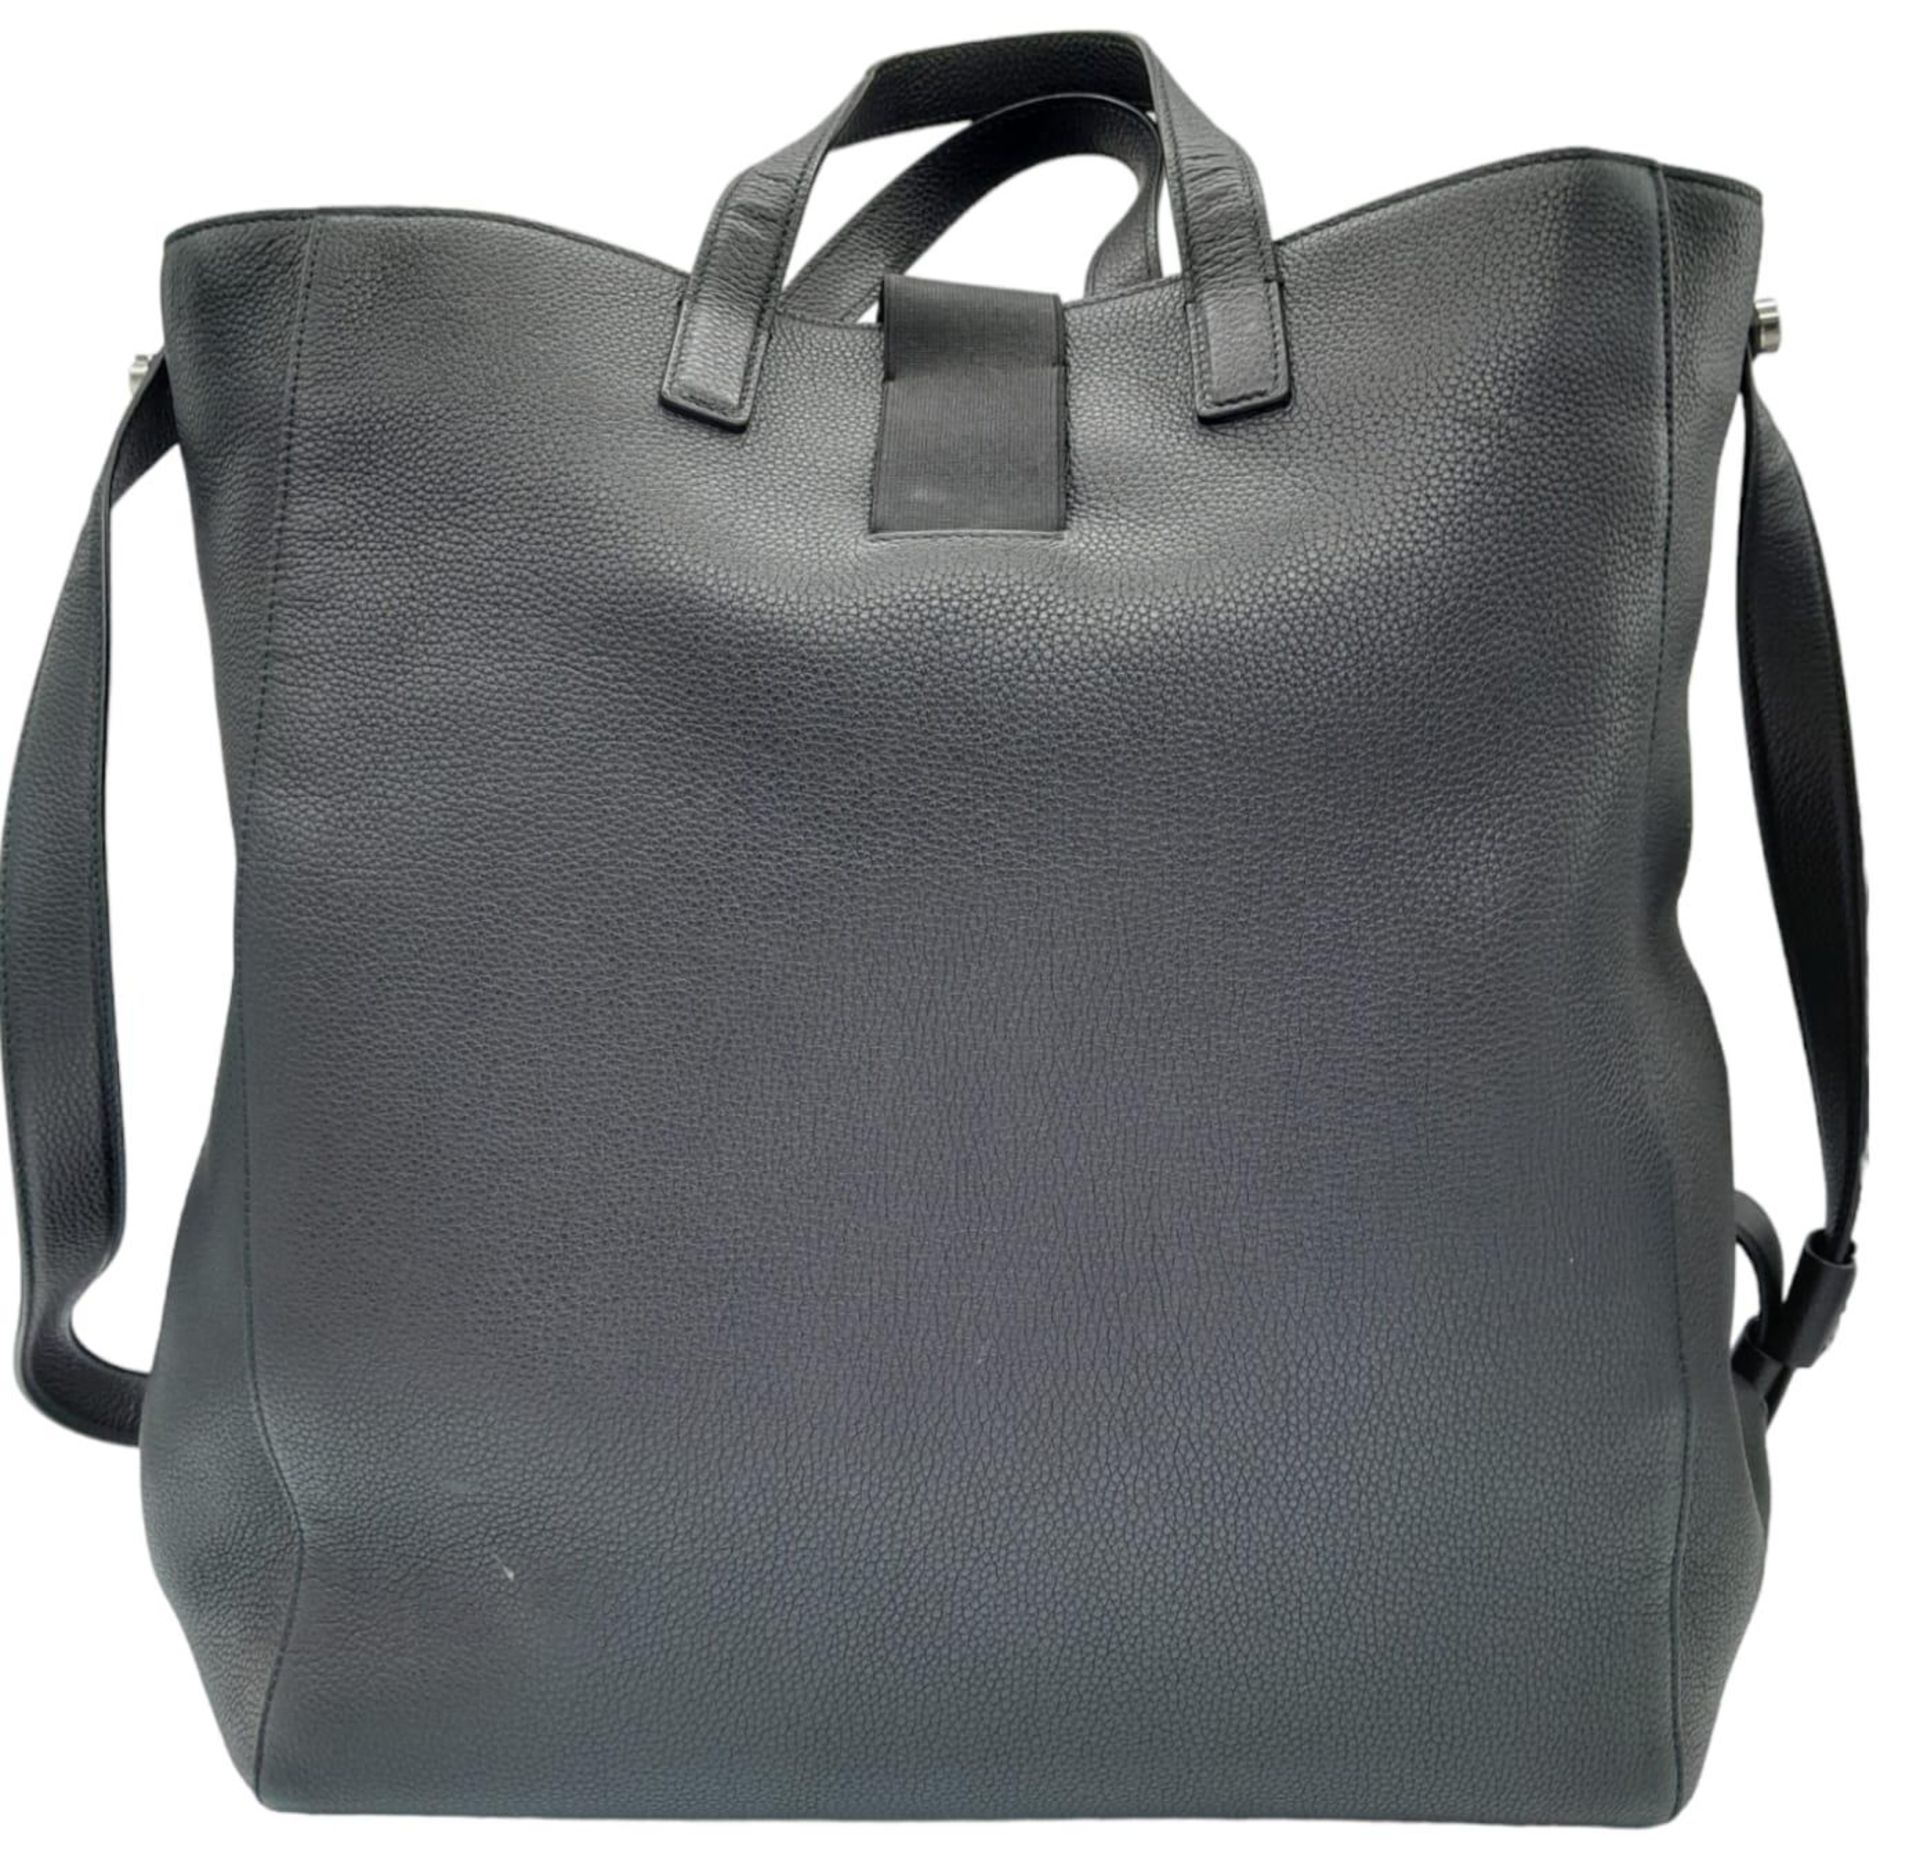 A Christopher Kane Black Tote Bag. Leather exterior with silver-toned hardware, two top handles, - Bild 3 aus 7